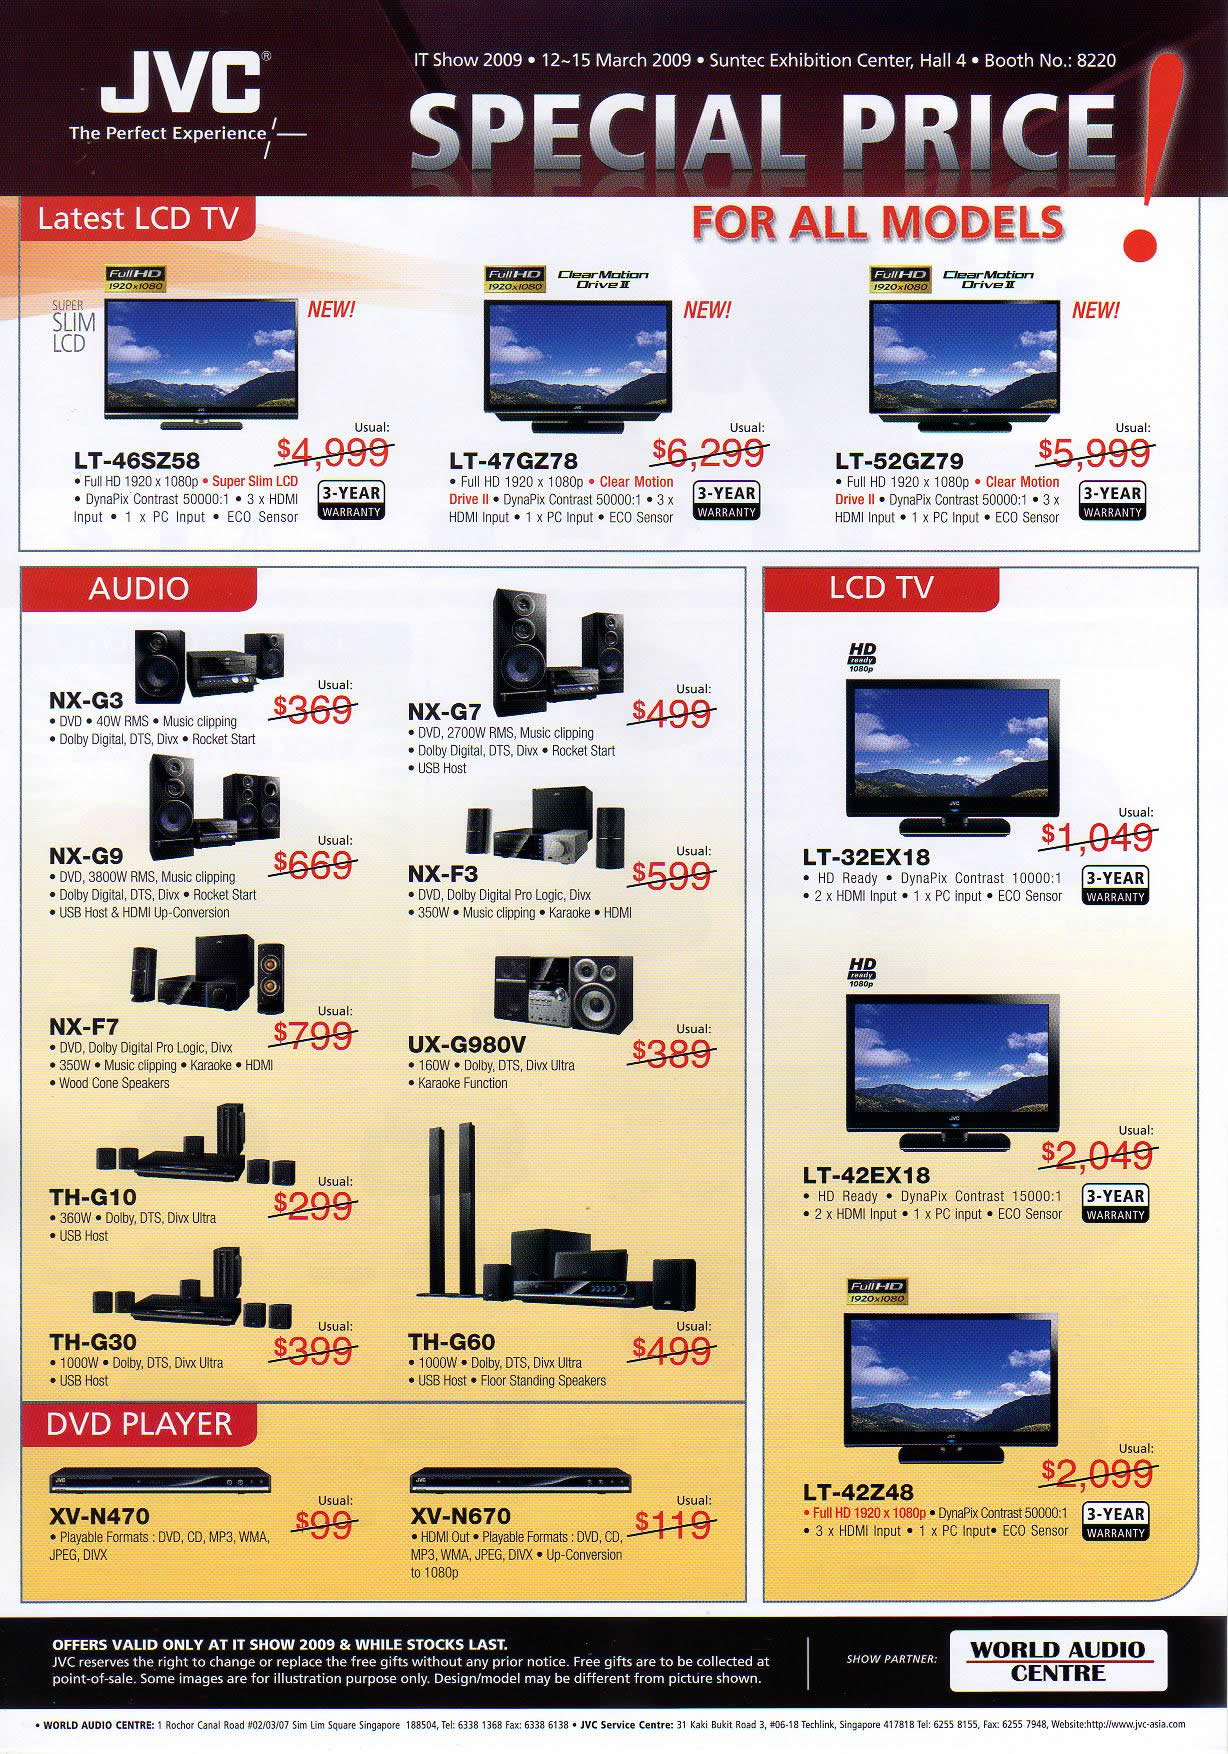 IT Show 2009 price list image brochure of JVC LCD TV Home Theater DVD (coldfreeze)